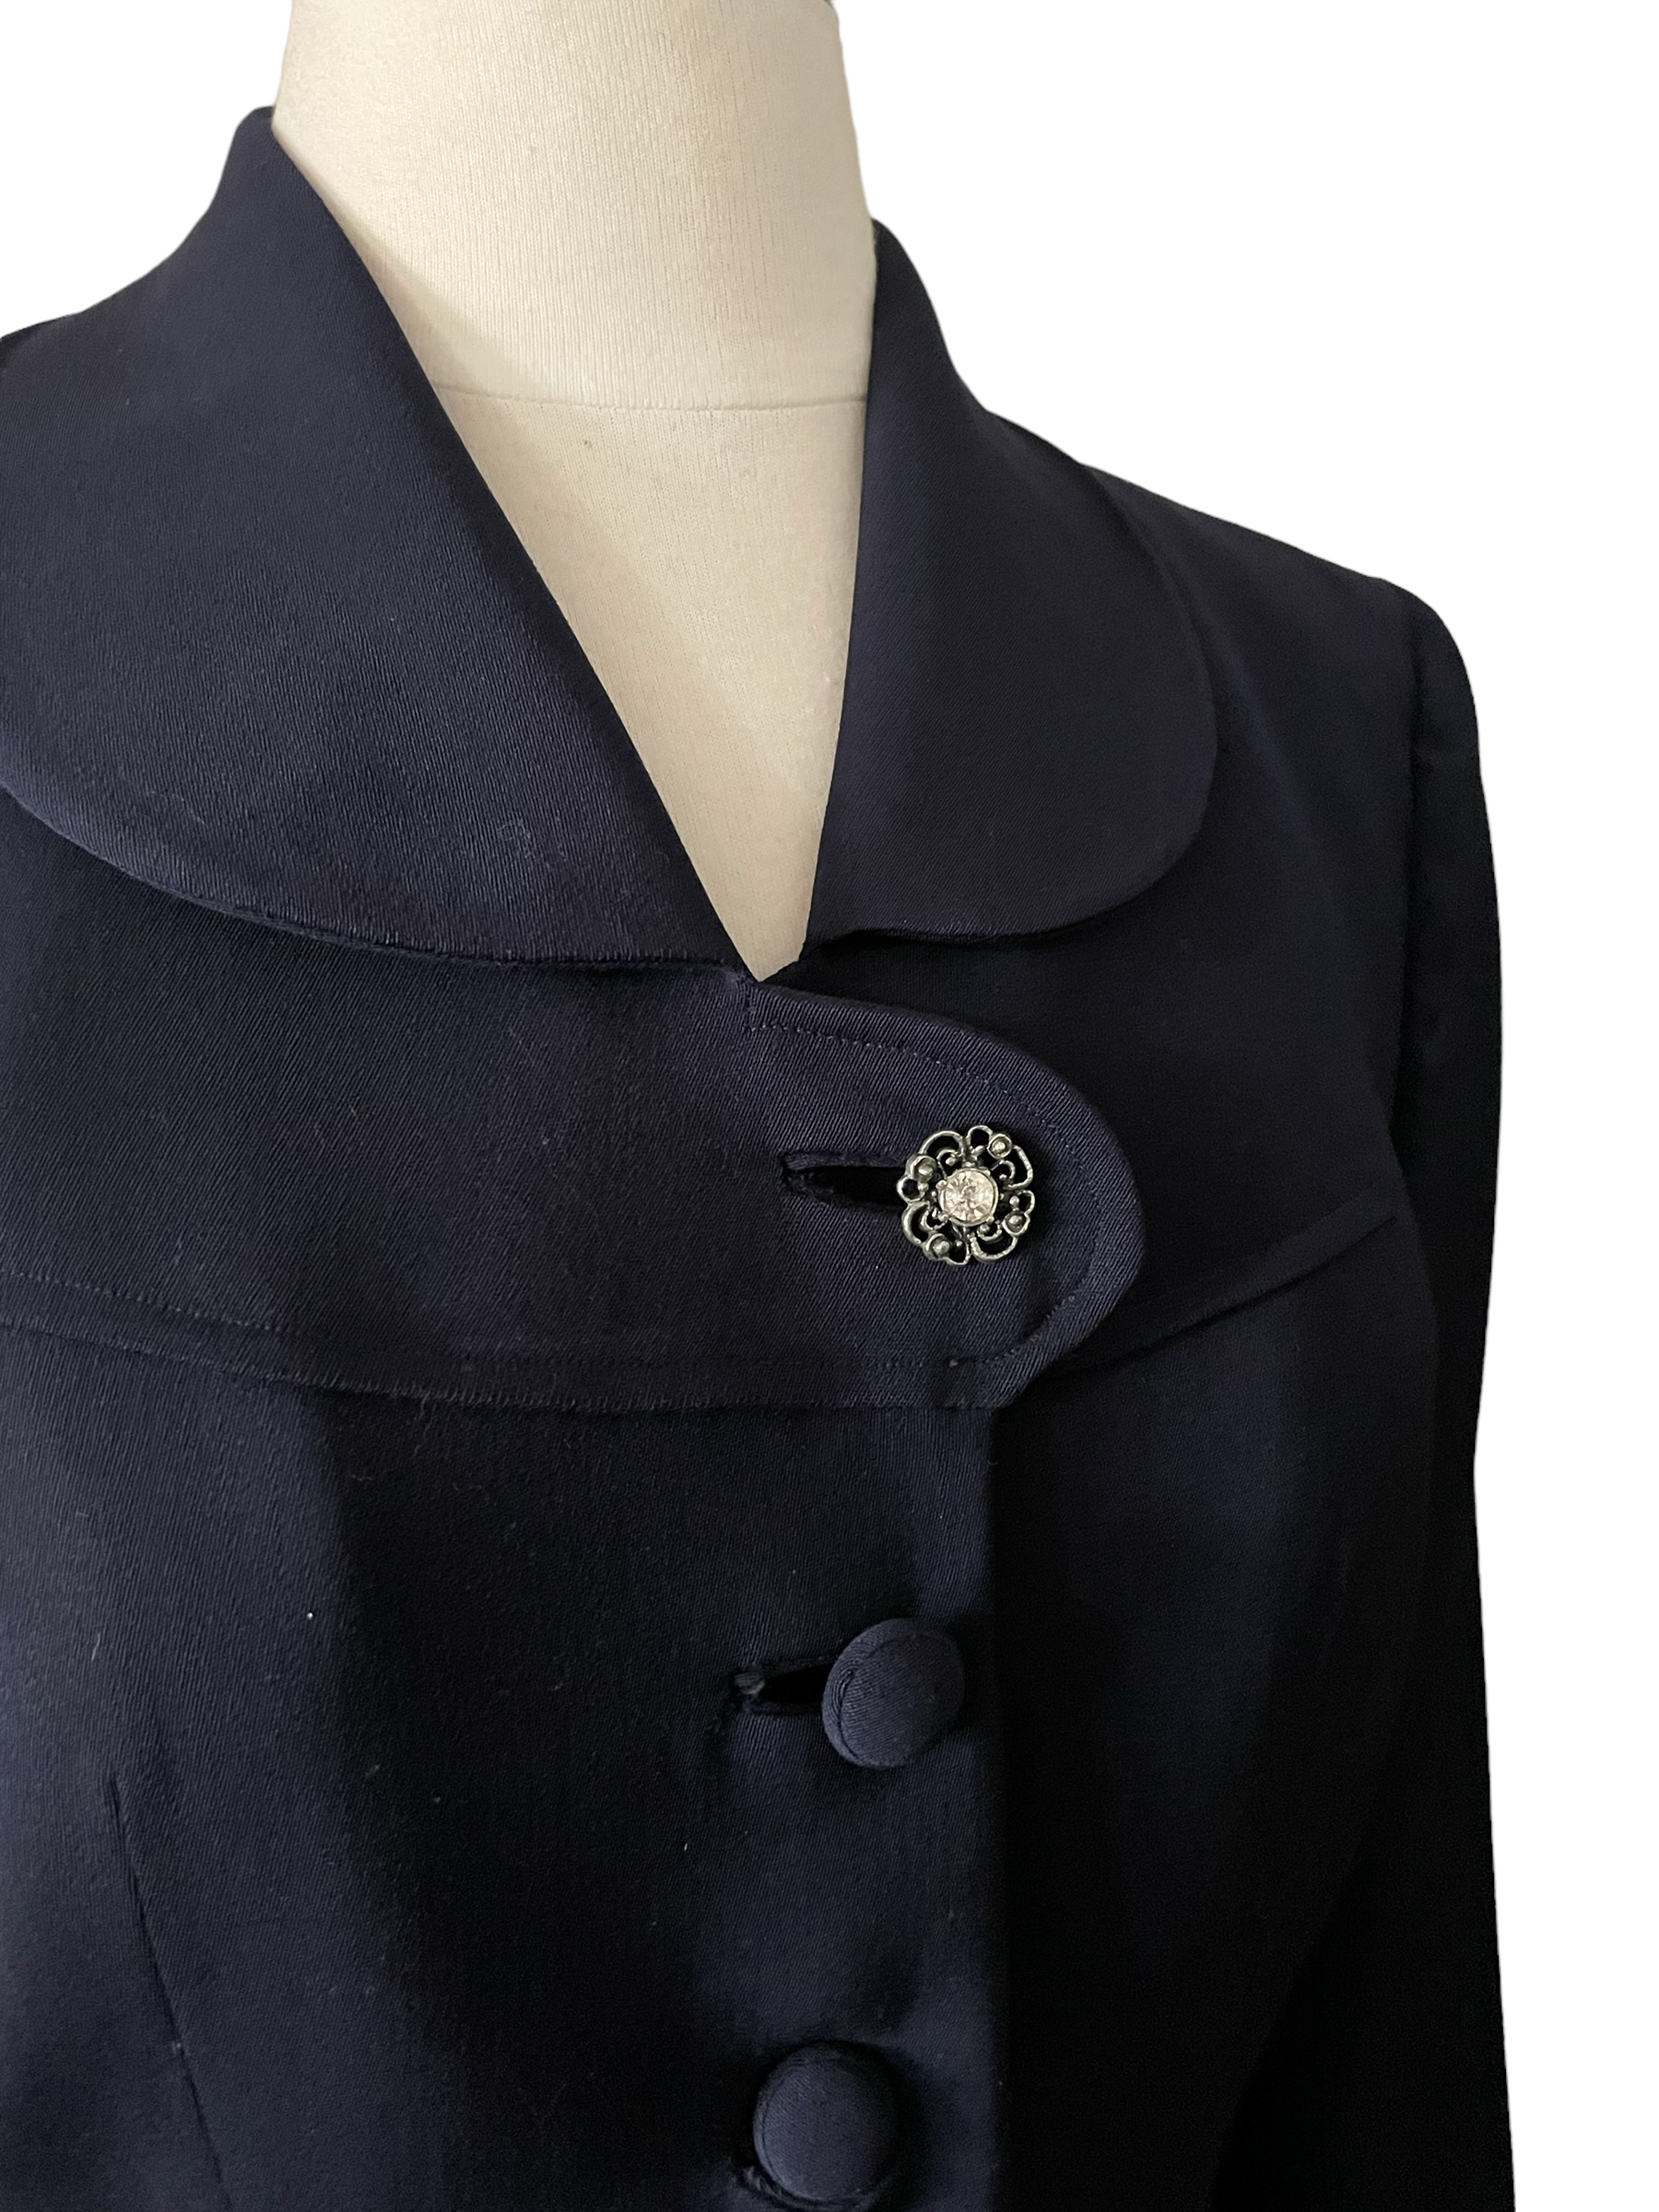 Front Close Up View 1940s Best's Apparel Seattle Navy Blue Gabardine Wool Jacket Seattle Vintage Clothing